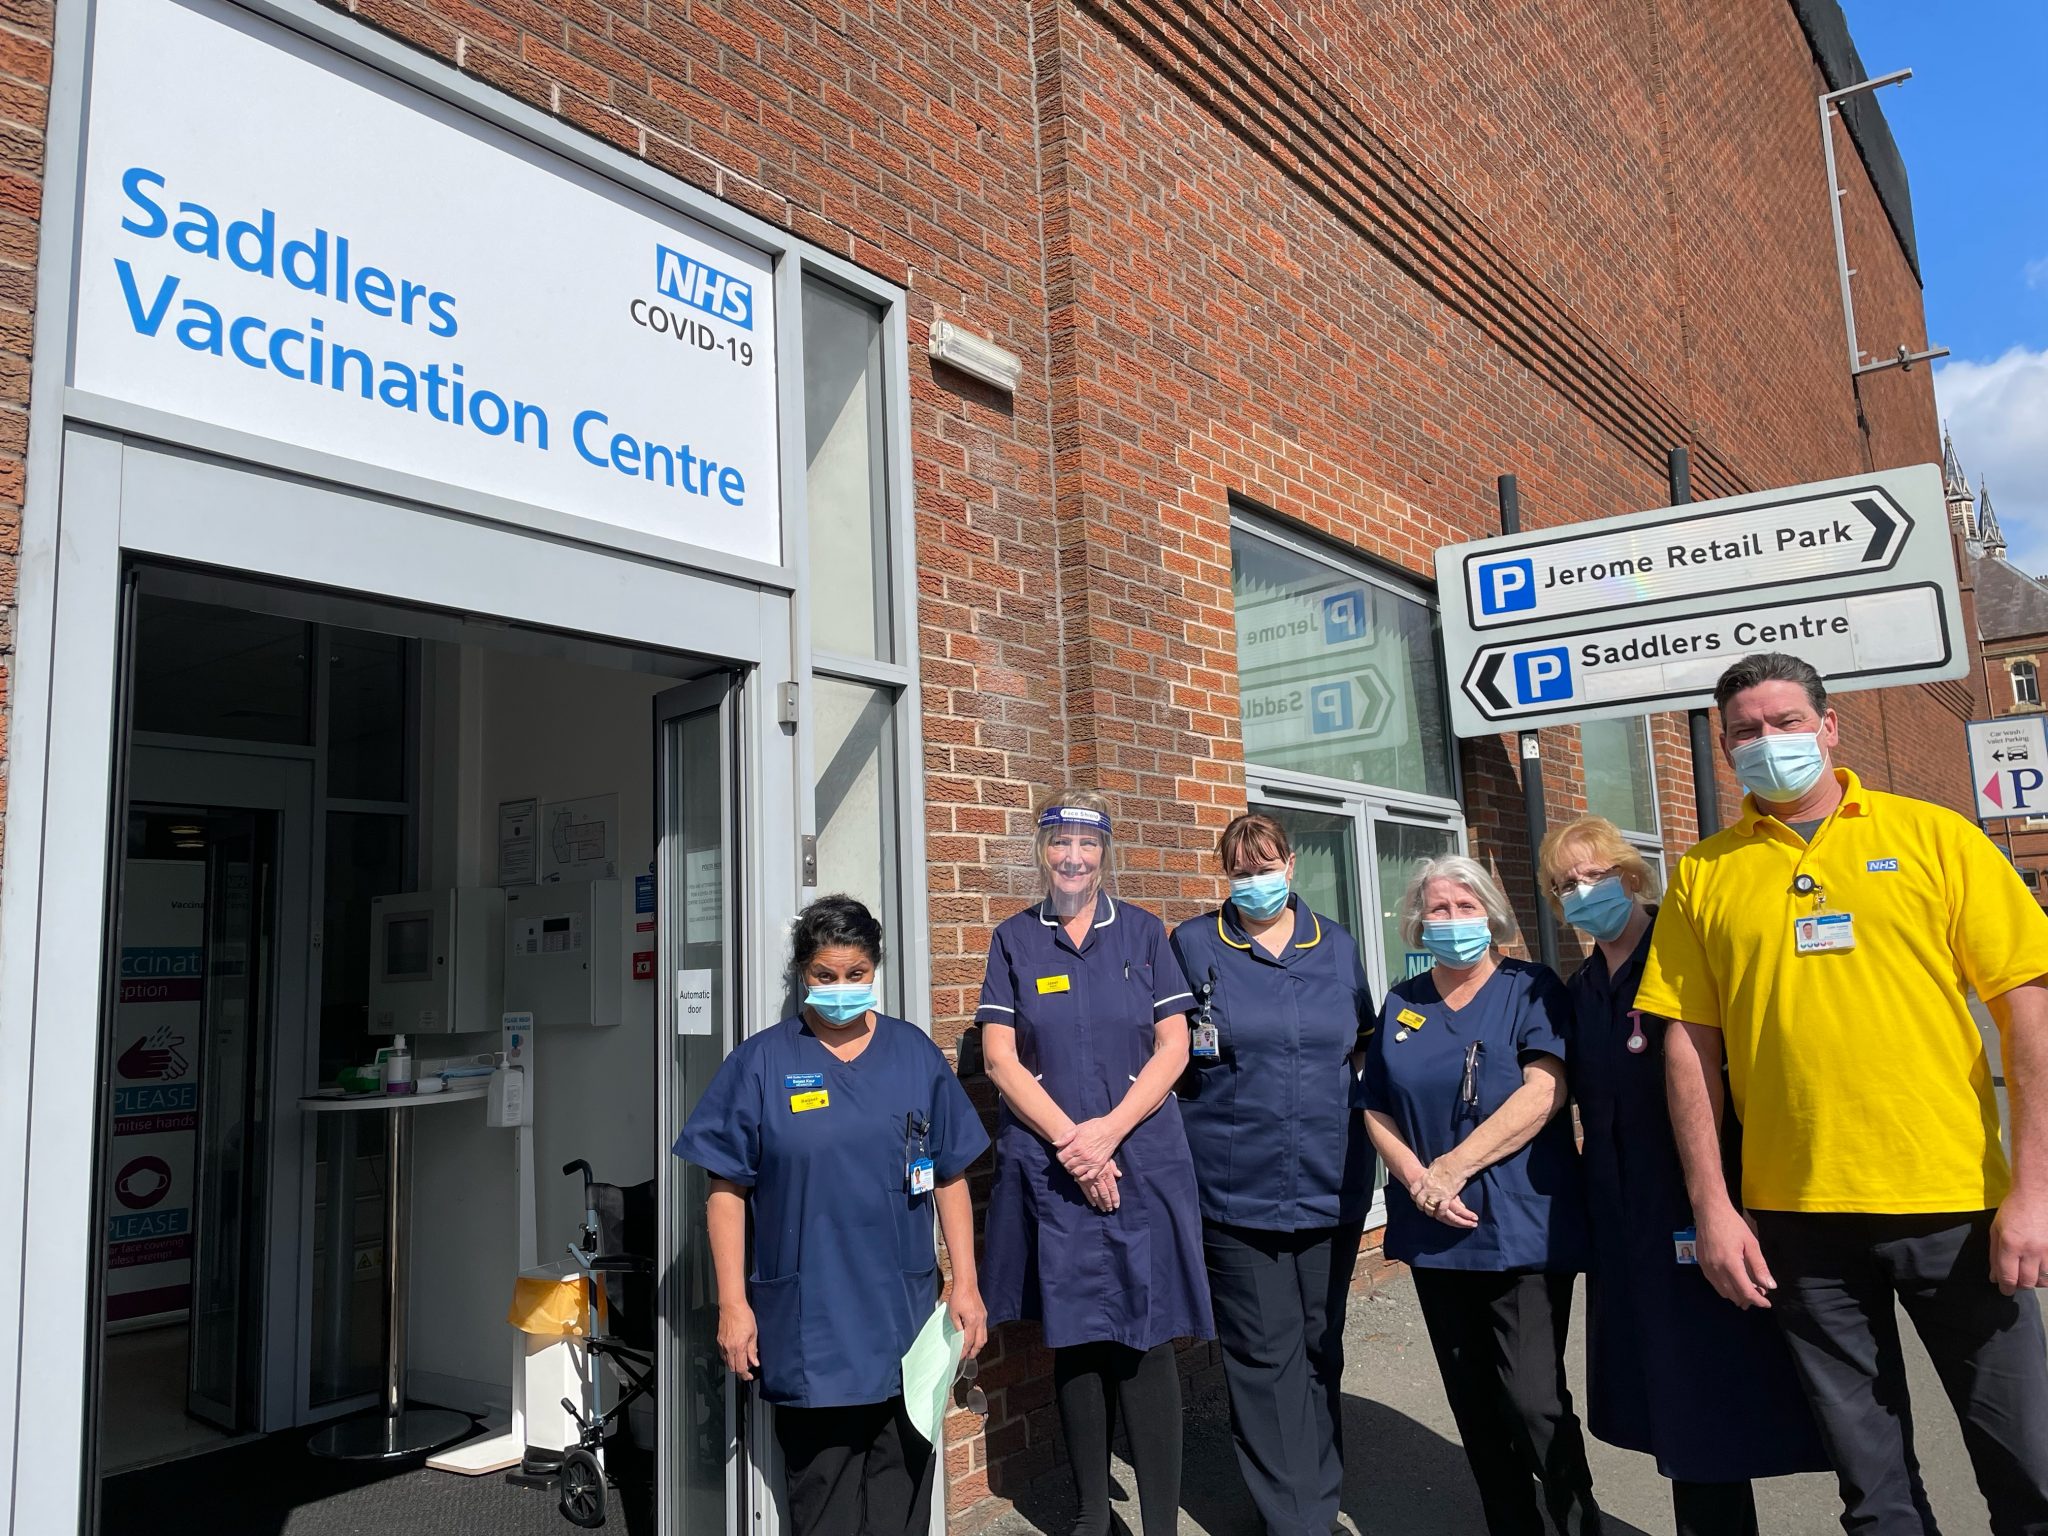 Saddlers Vaccination Centre